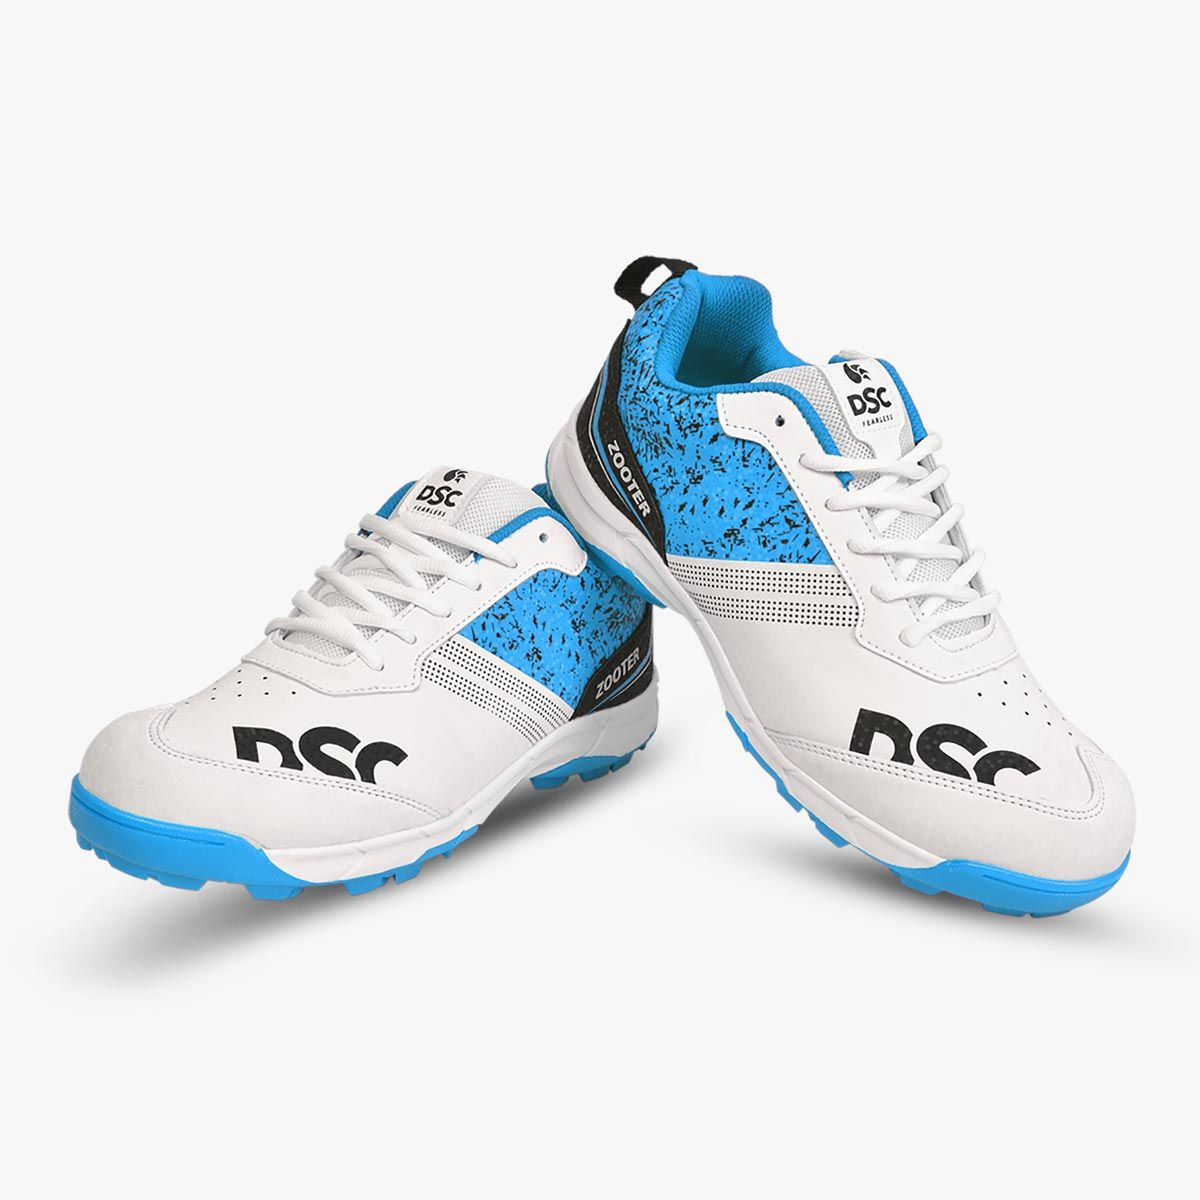 DSC Zooter Junior Cricket Shoes Blue and White